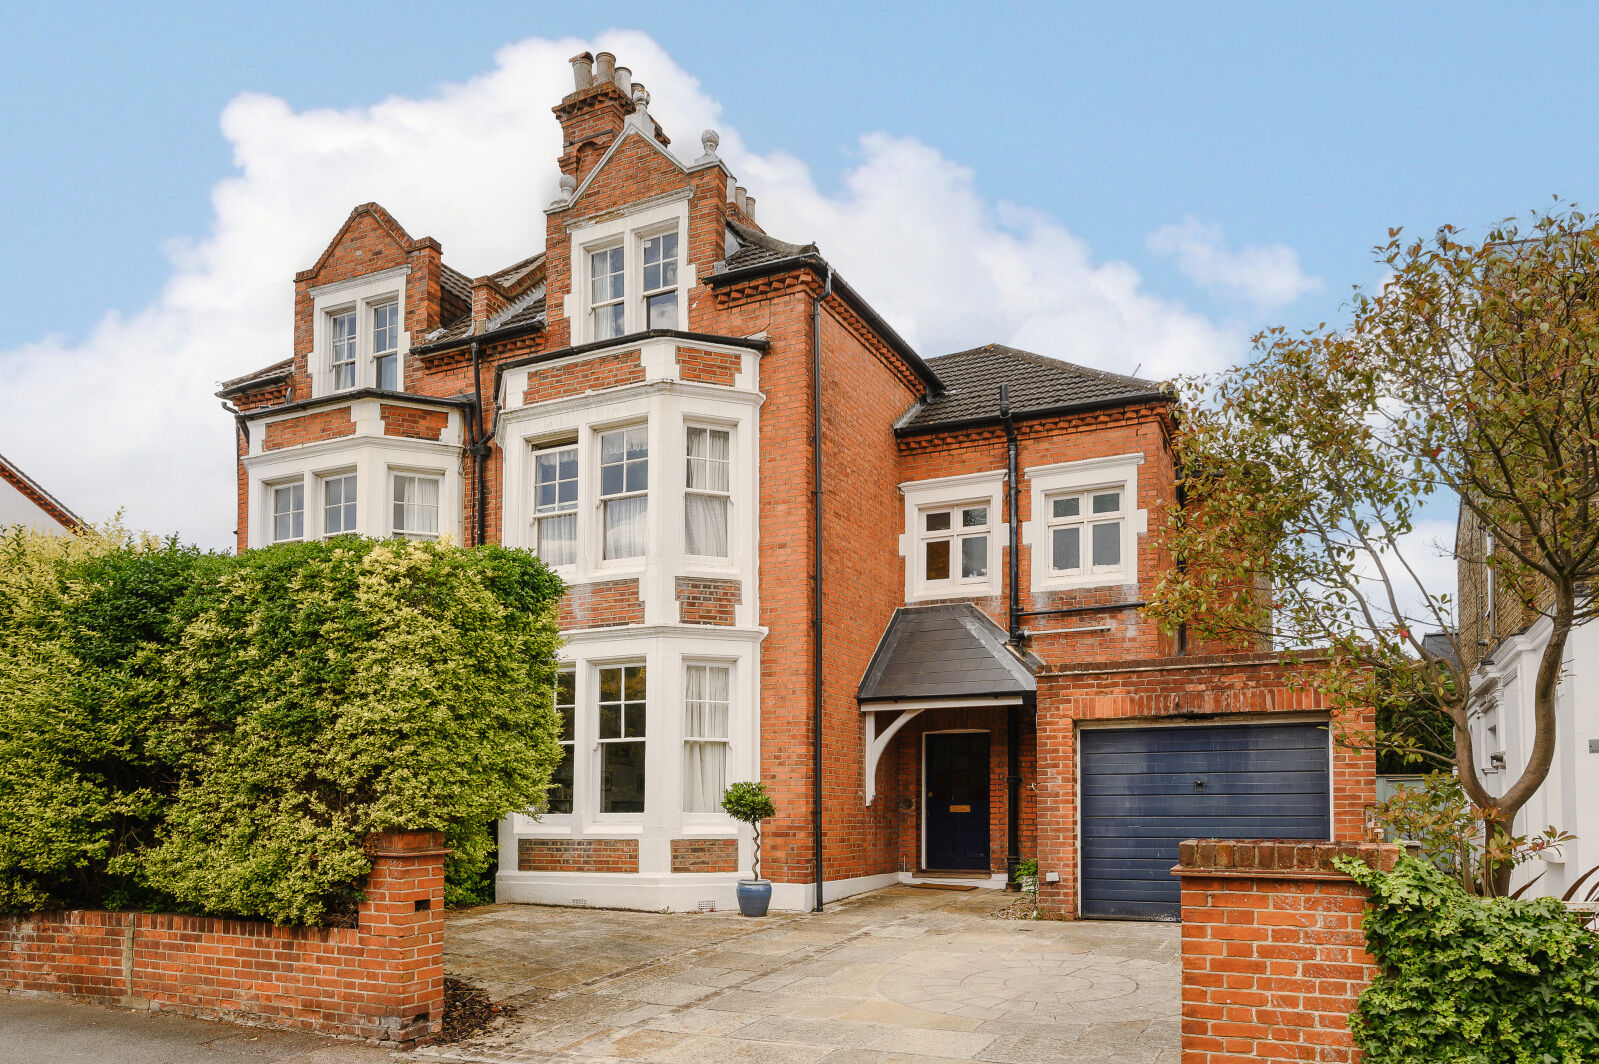 5 bedroom semi detached house for sale Kings Road, London, SW19, main image